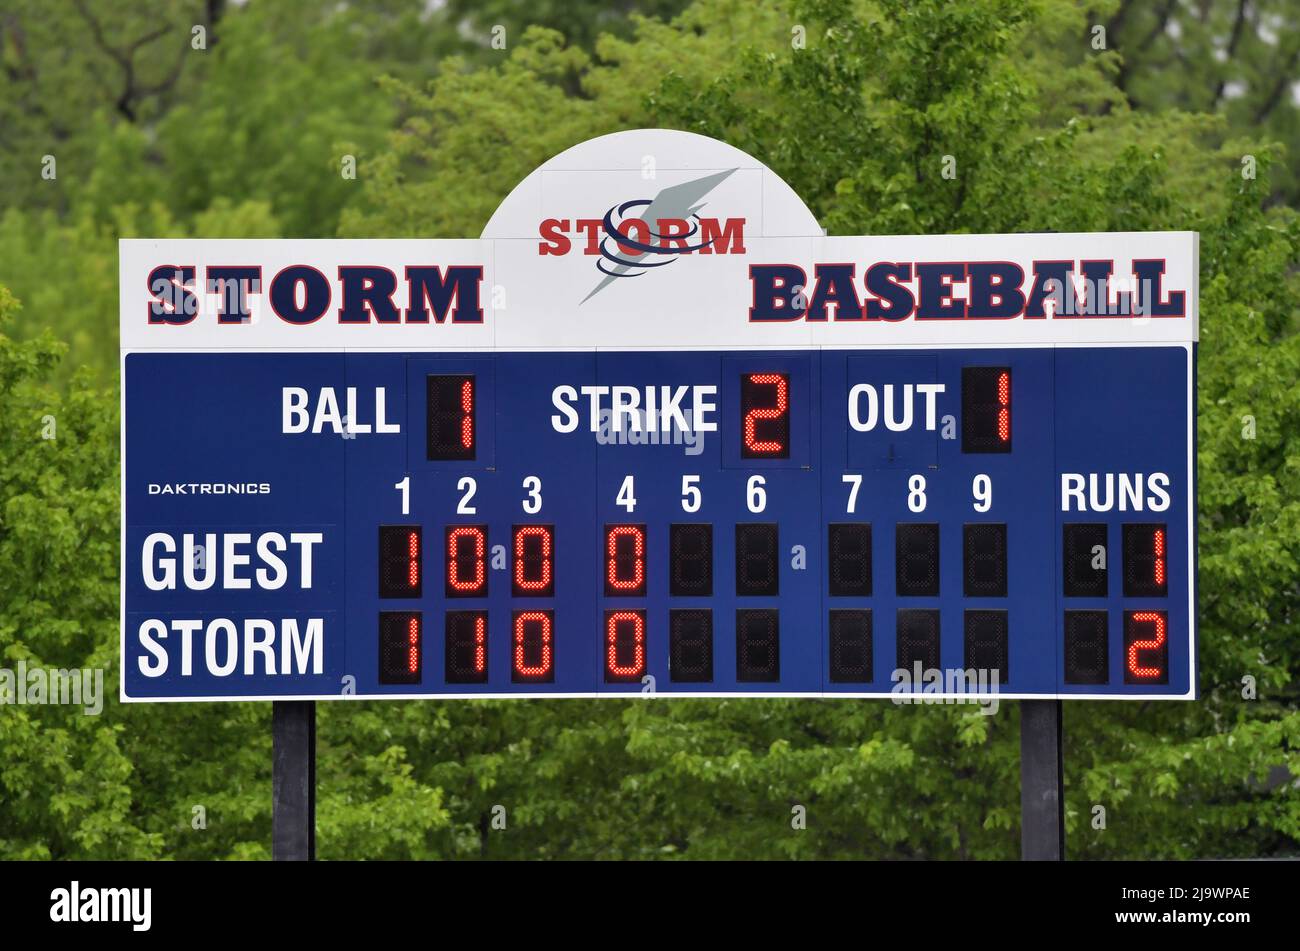 USA. A high school baseball scoreboard installed beyond the outfield fence. Stock Photo